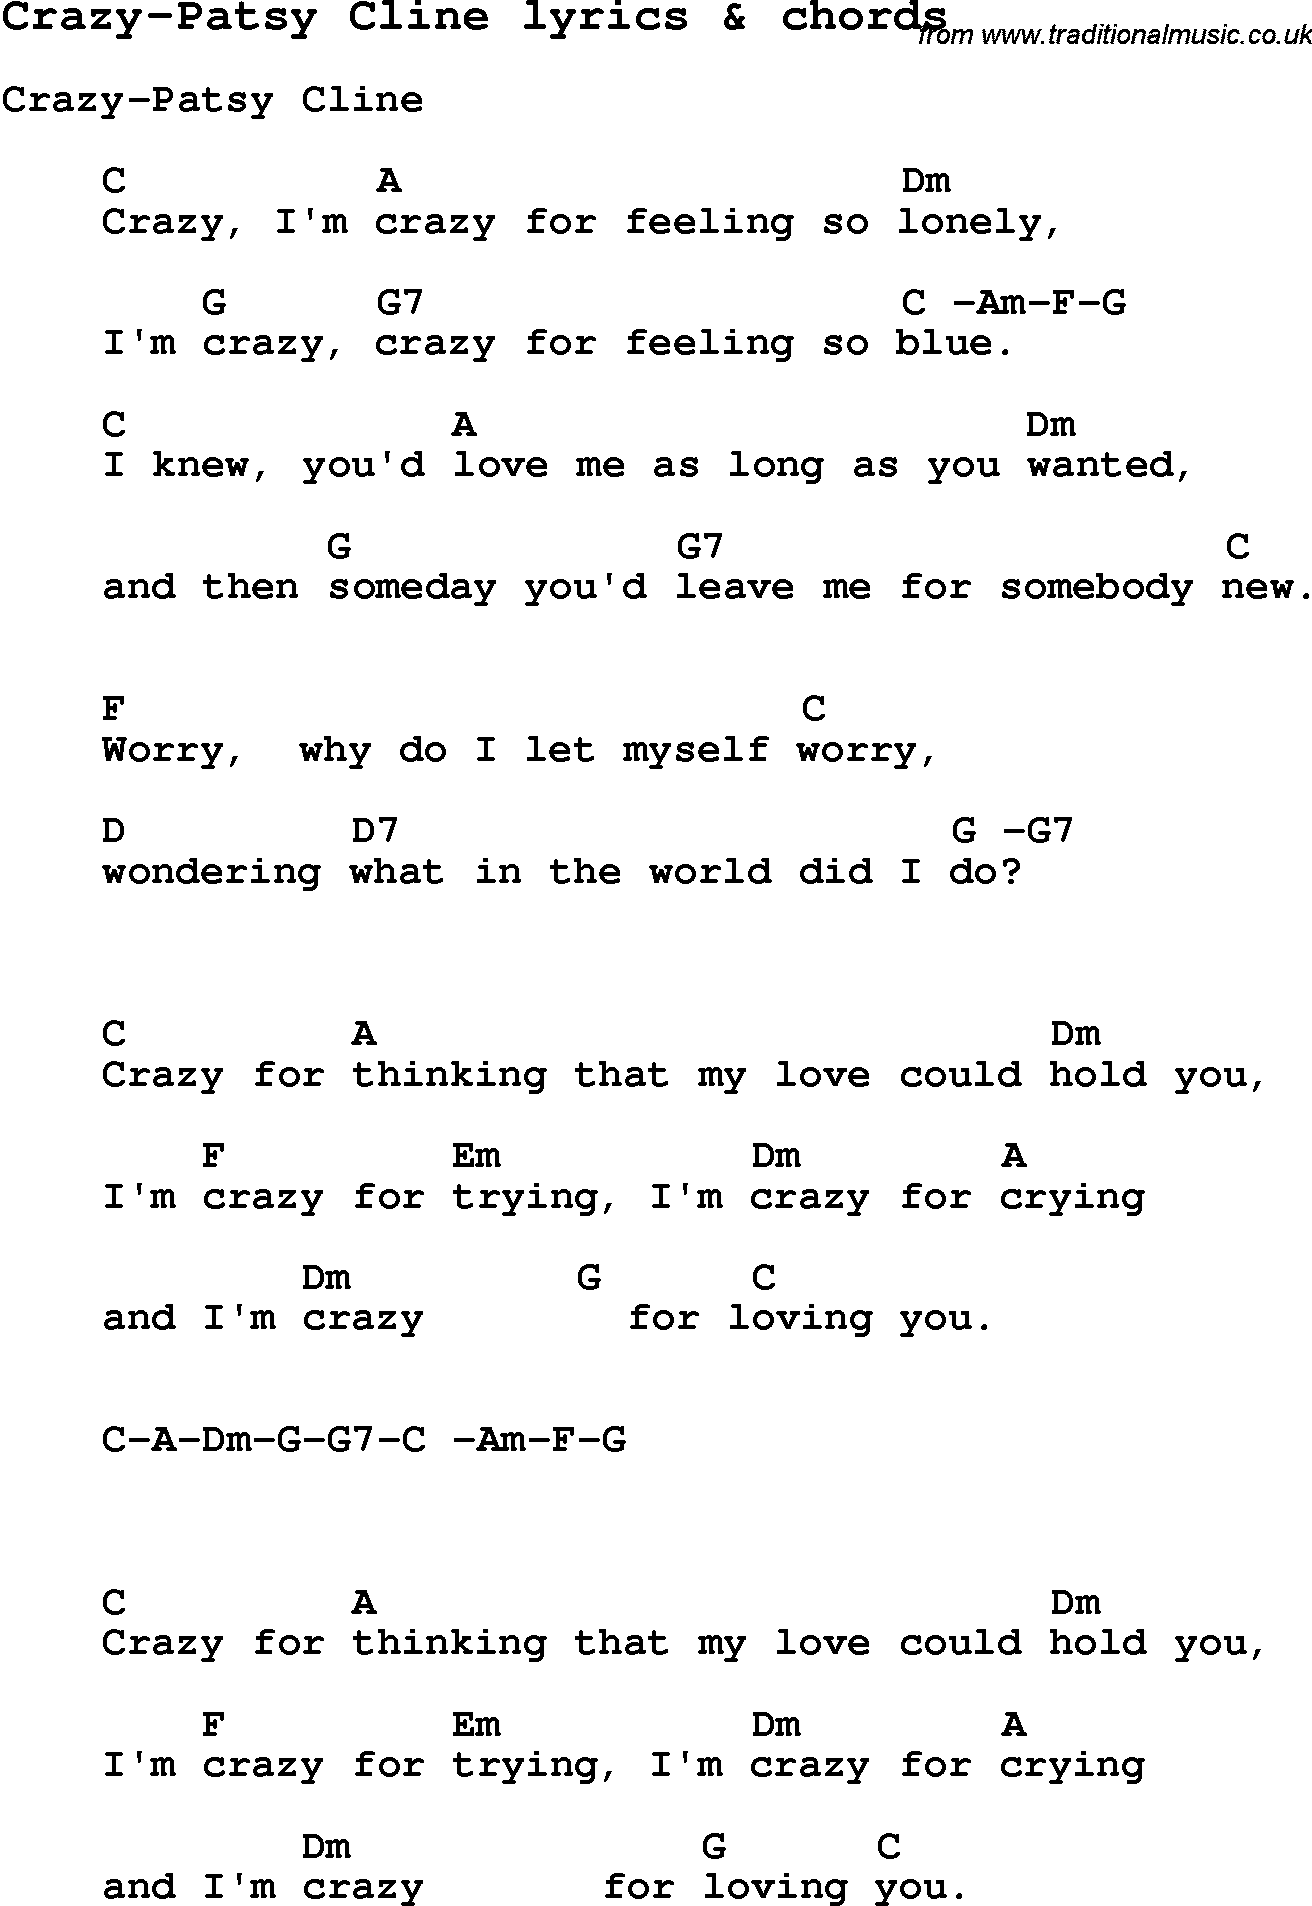 Love Song Lyrics for: Crazy-Patsy Cline with chords for Ukulele ...